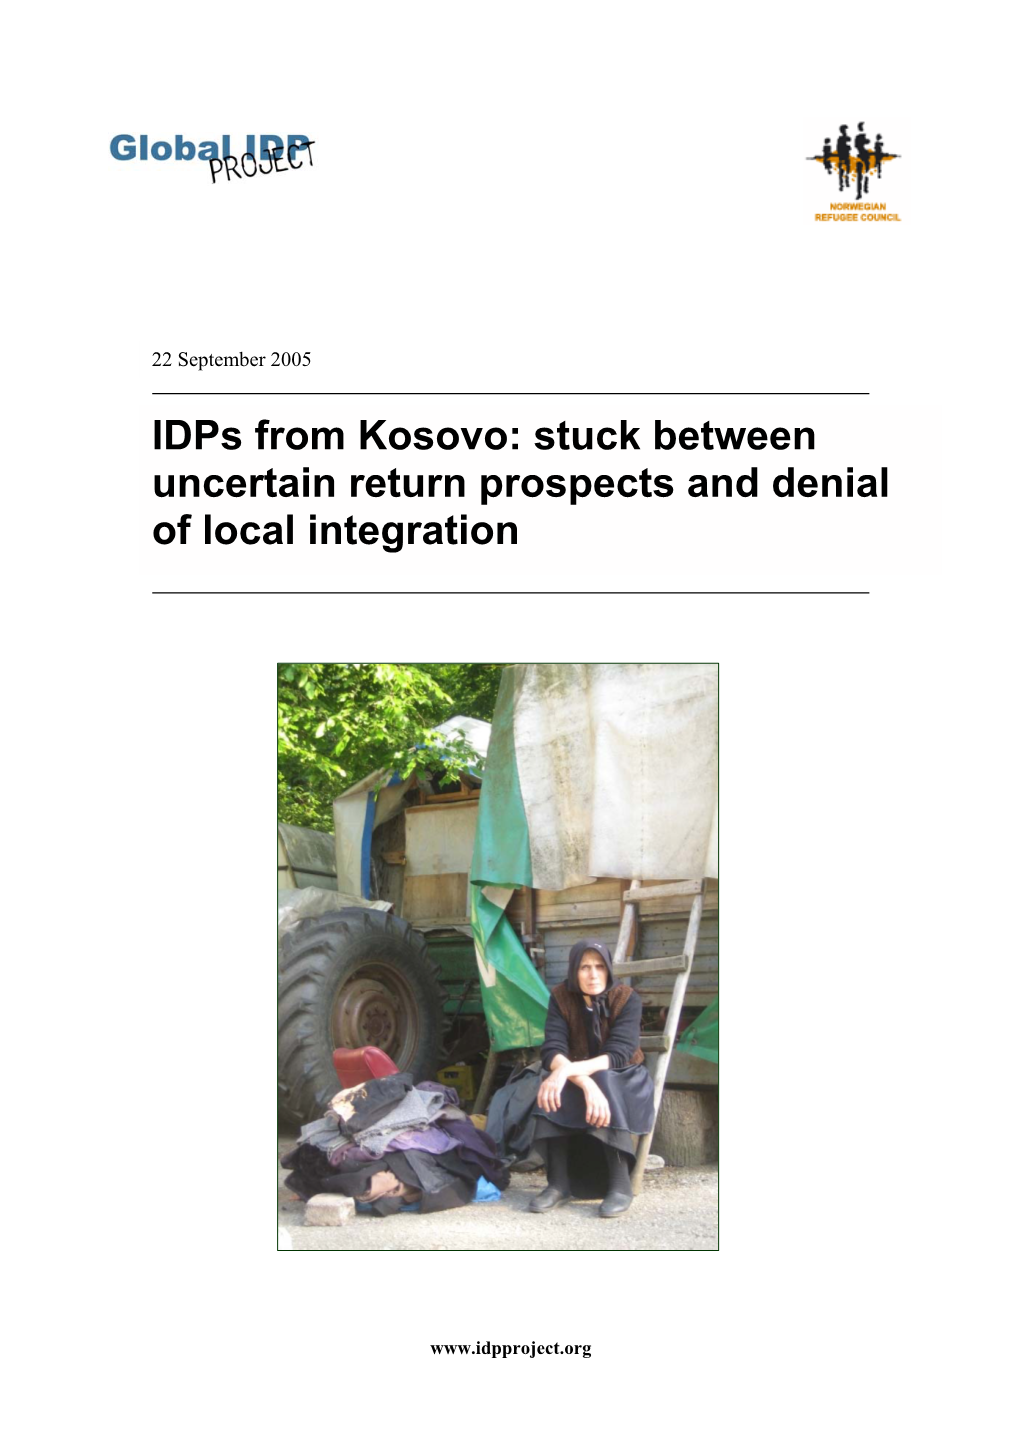 Idps from Kosovo: Stuck Between Uncertain Return Prospects and Denial of Local Integration